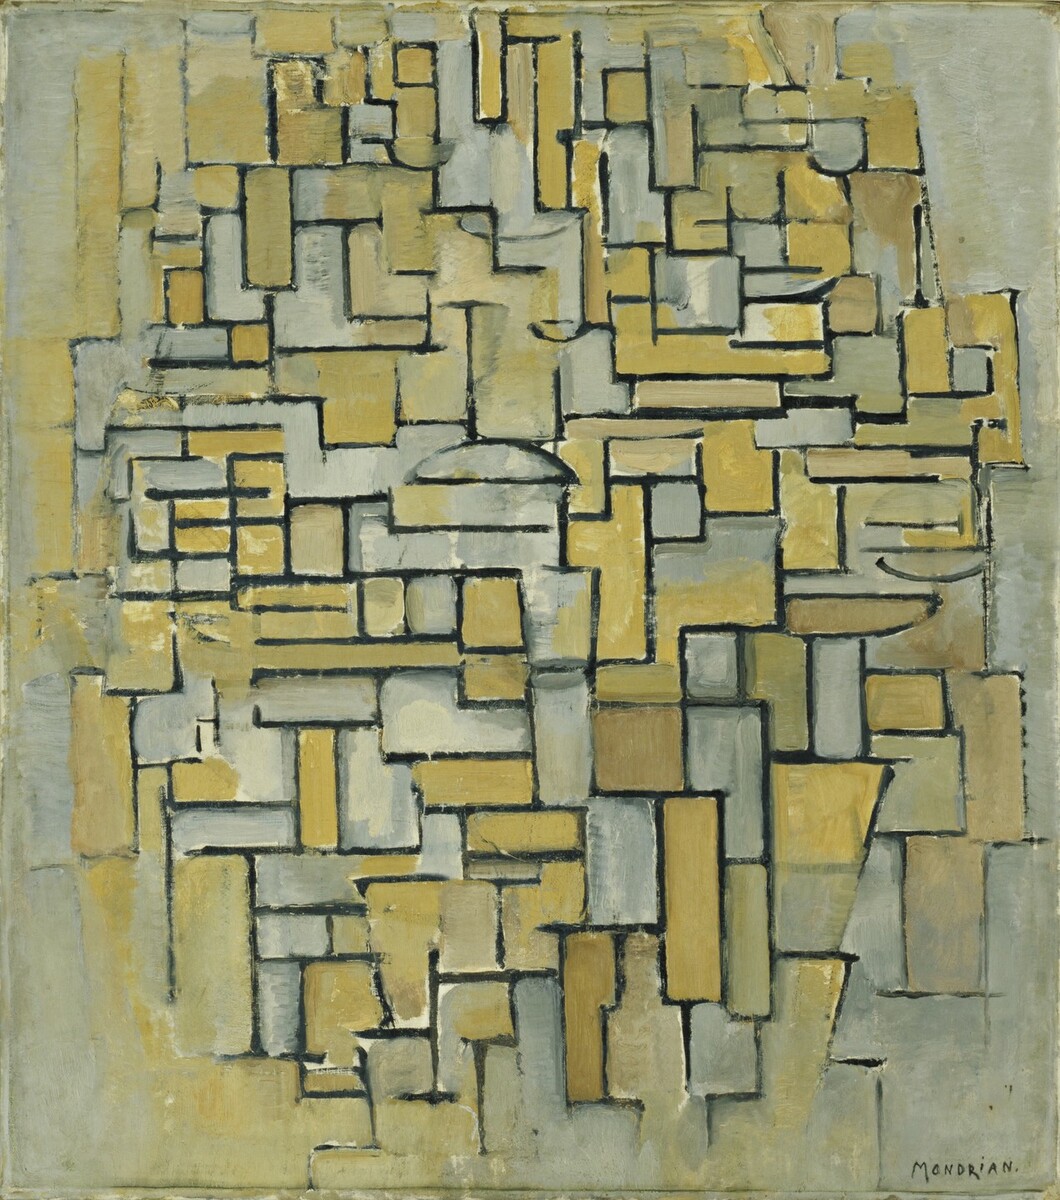 Piet Mondrian, Composition in Brown and Gray, 1913 #museumofmodernart #pietmondrian moma.org/collection/wor…